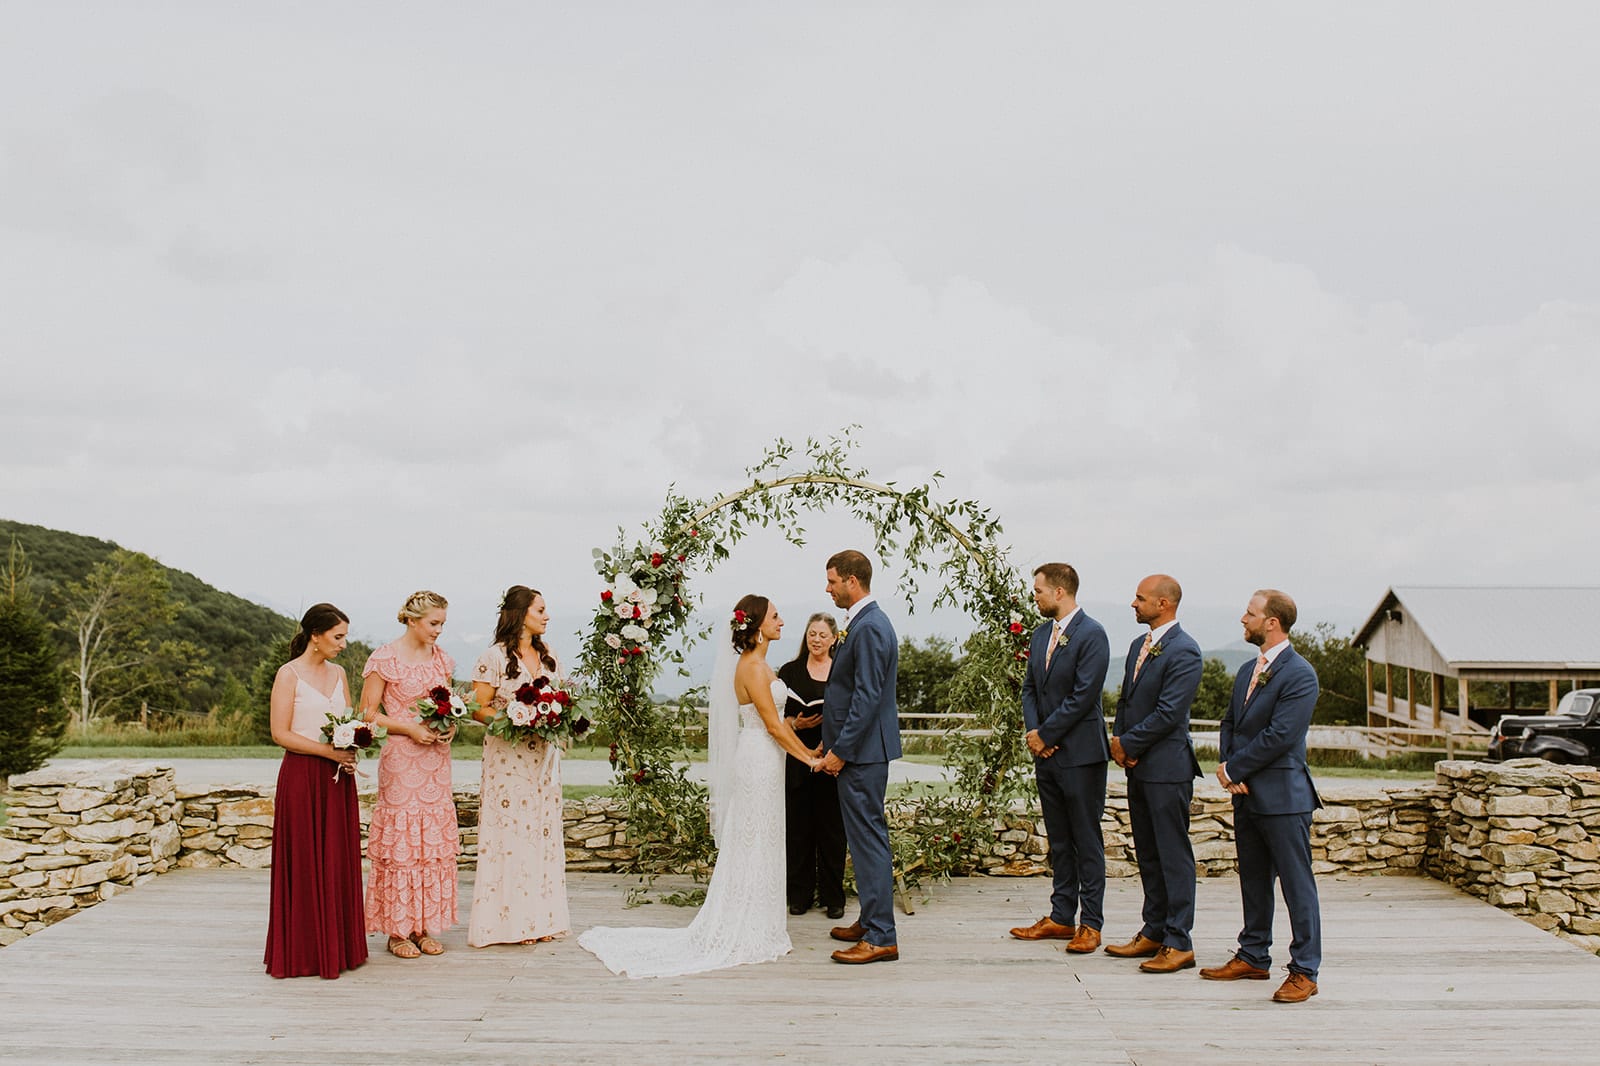 An intimate wedding ceremony in front of the blue ridge mountains at overlook barn, with a circle arbor adorned in lush florals.